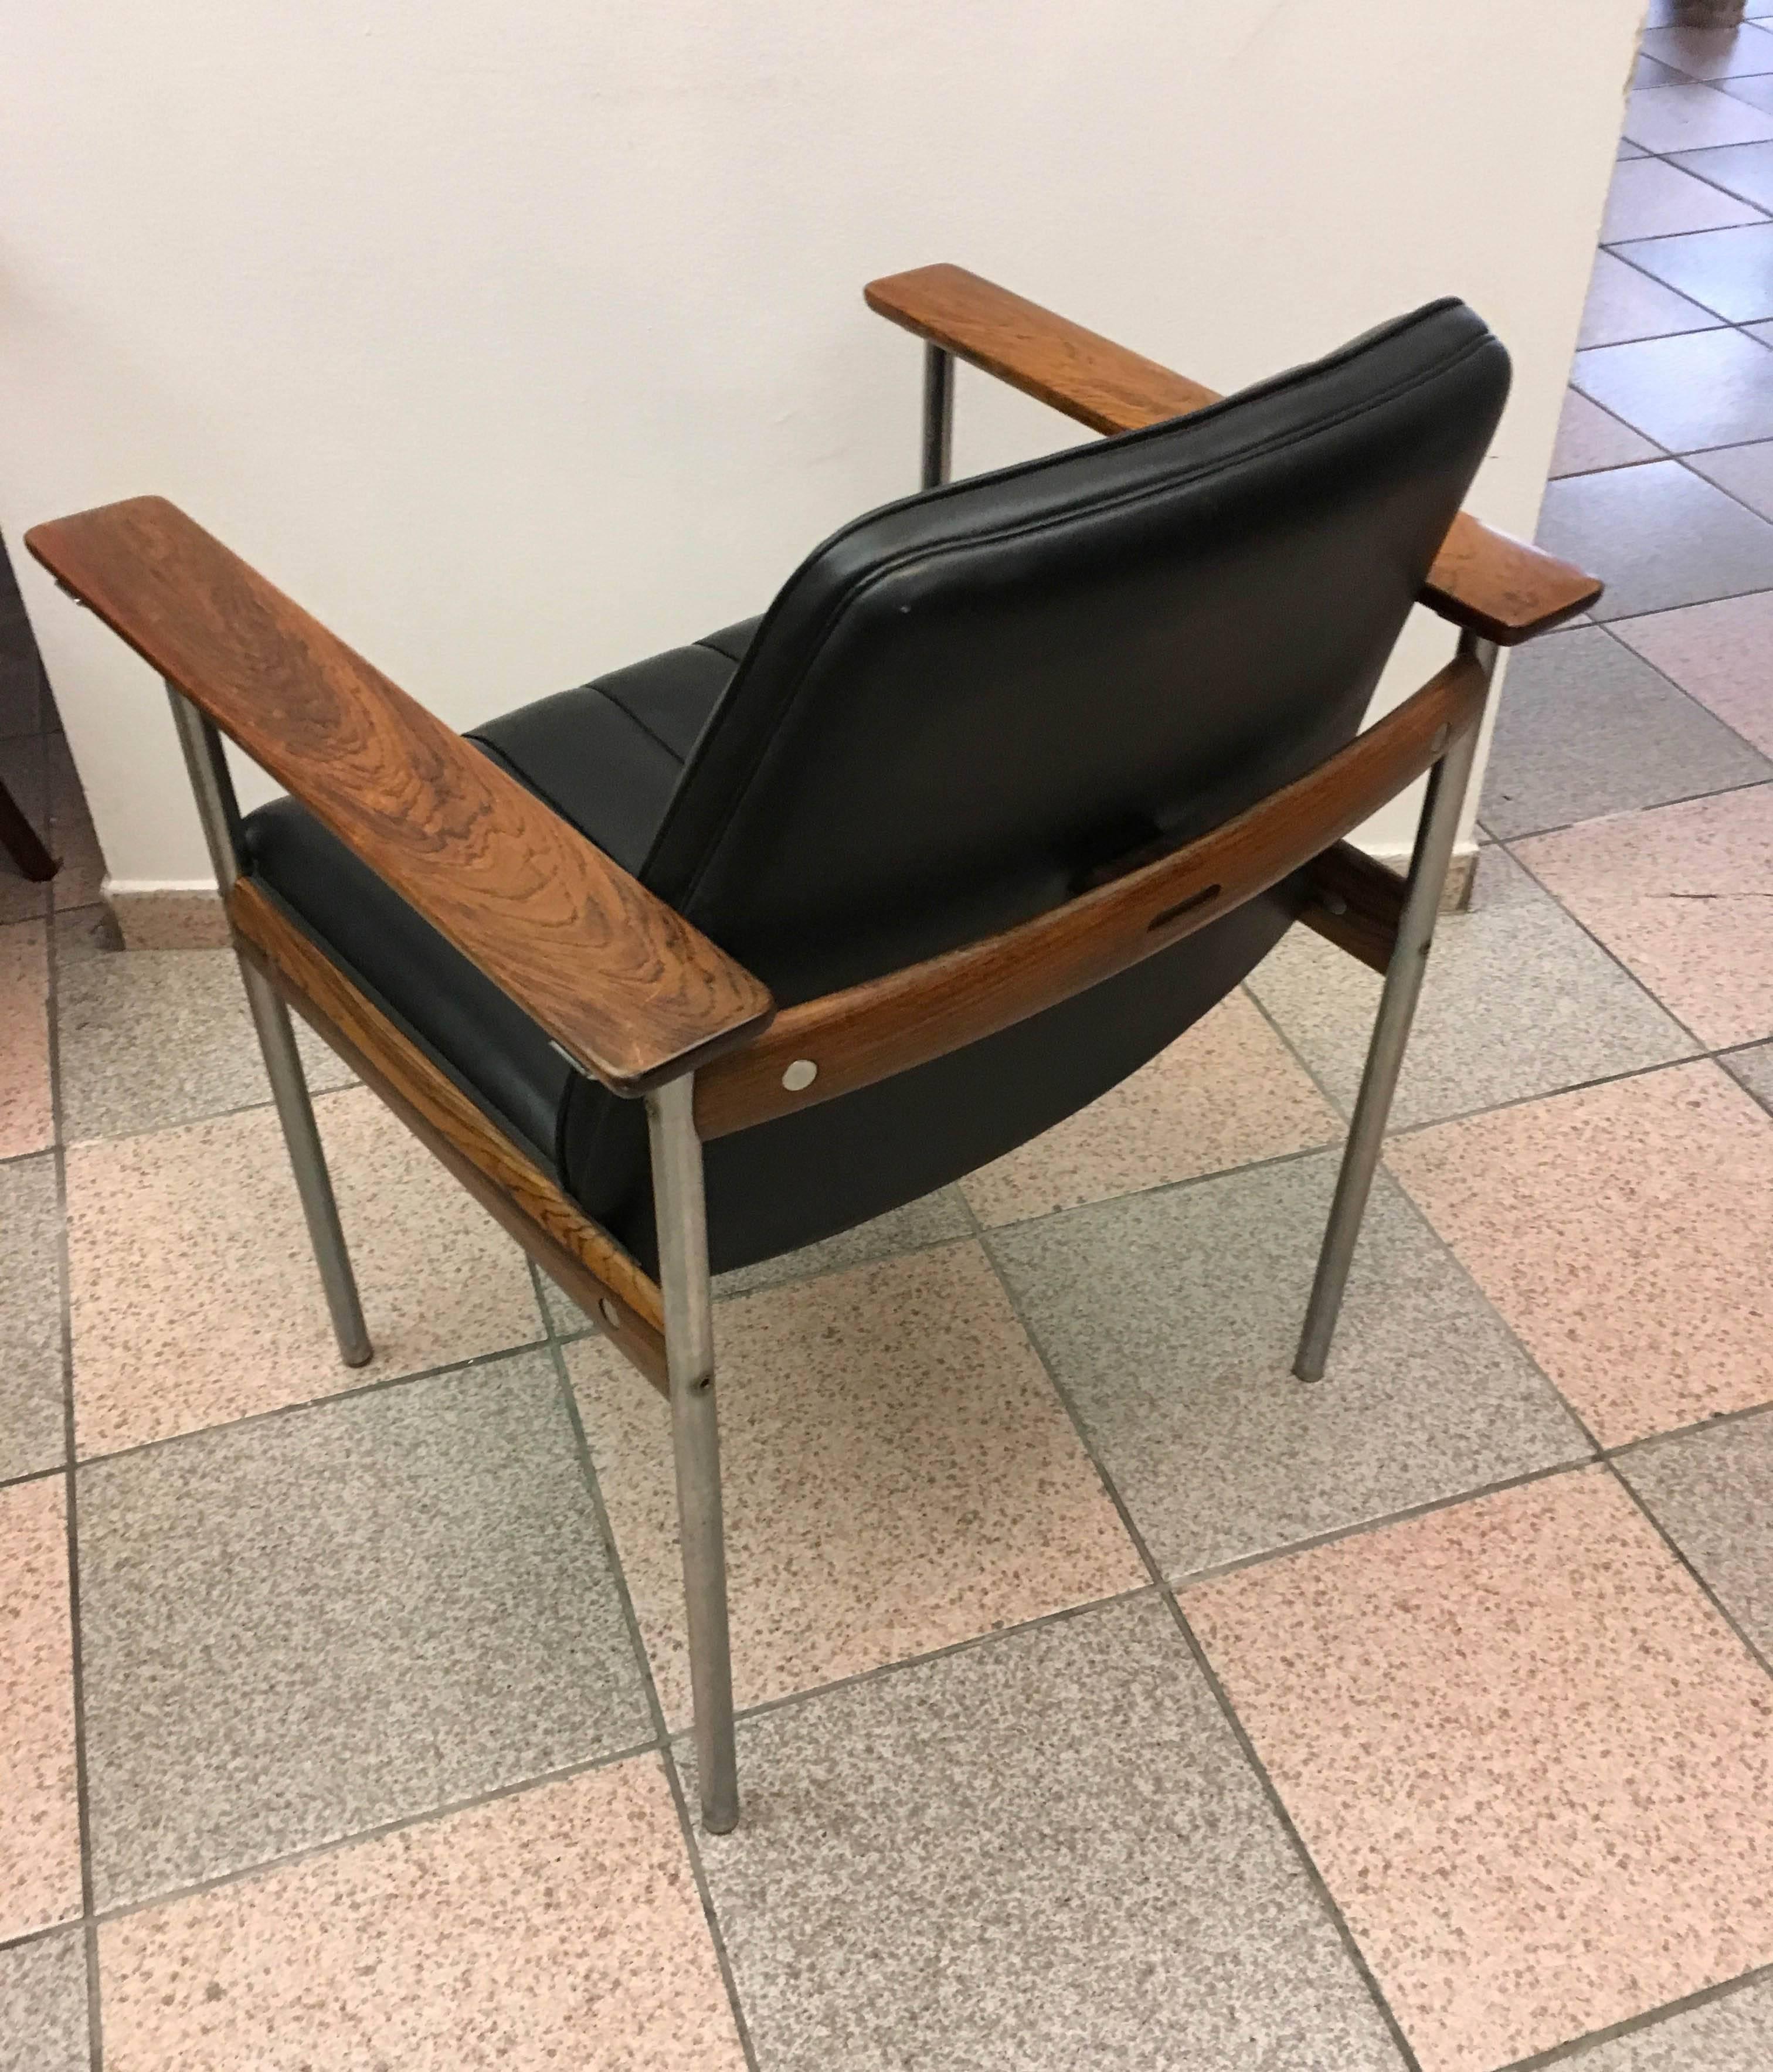 Steel legs with rosewood elements and leather seat designed by Sven Ivar Dysthe in Norway for Dokka Mobler in the 1960s.
Those chairs are in very good originals condition with small patina on steel and wood parts.
Dimensions: 81 H x 65 W x 58 D cm.